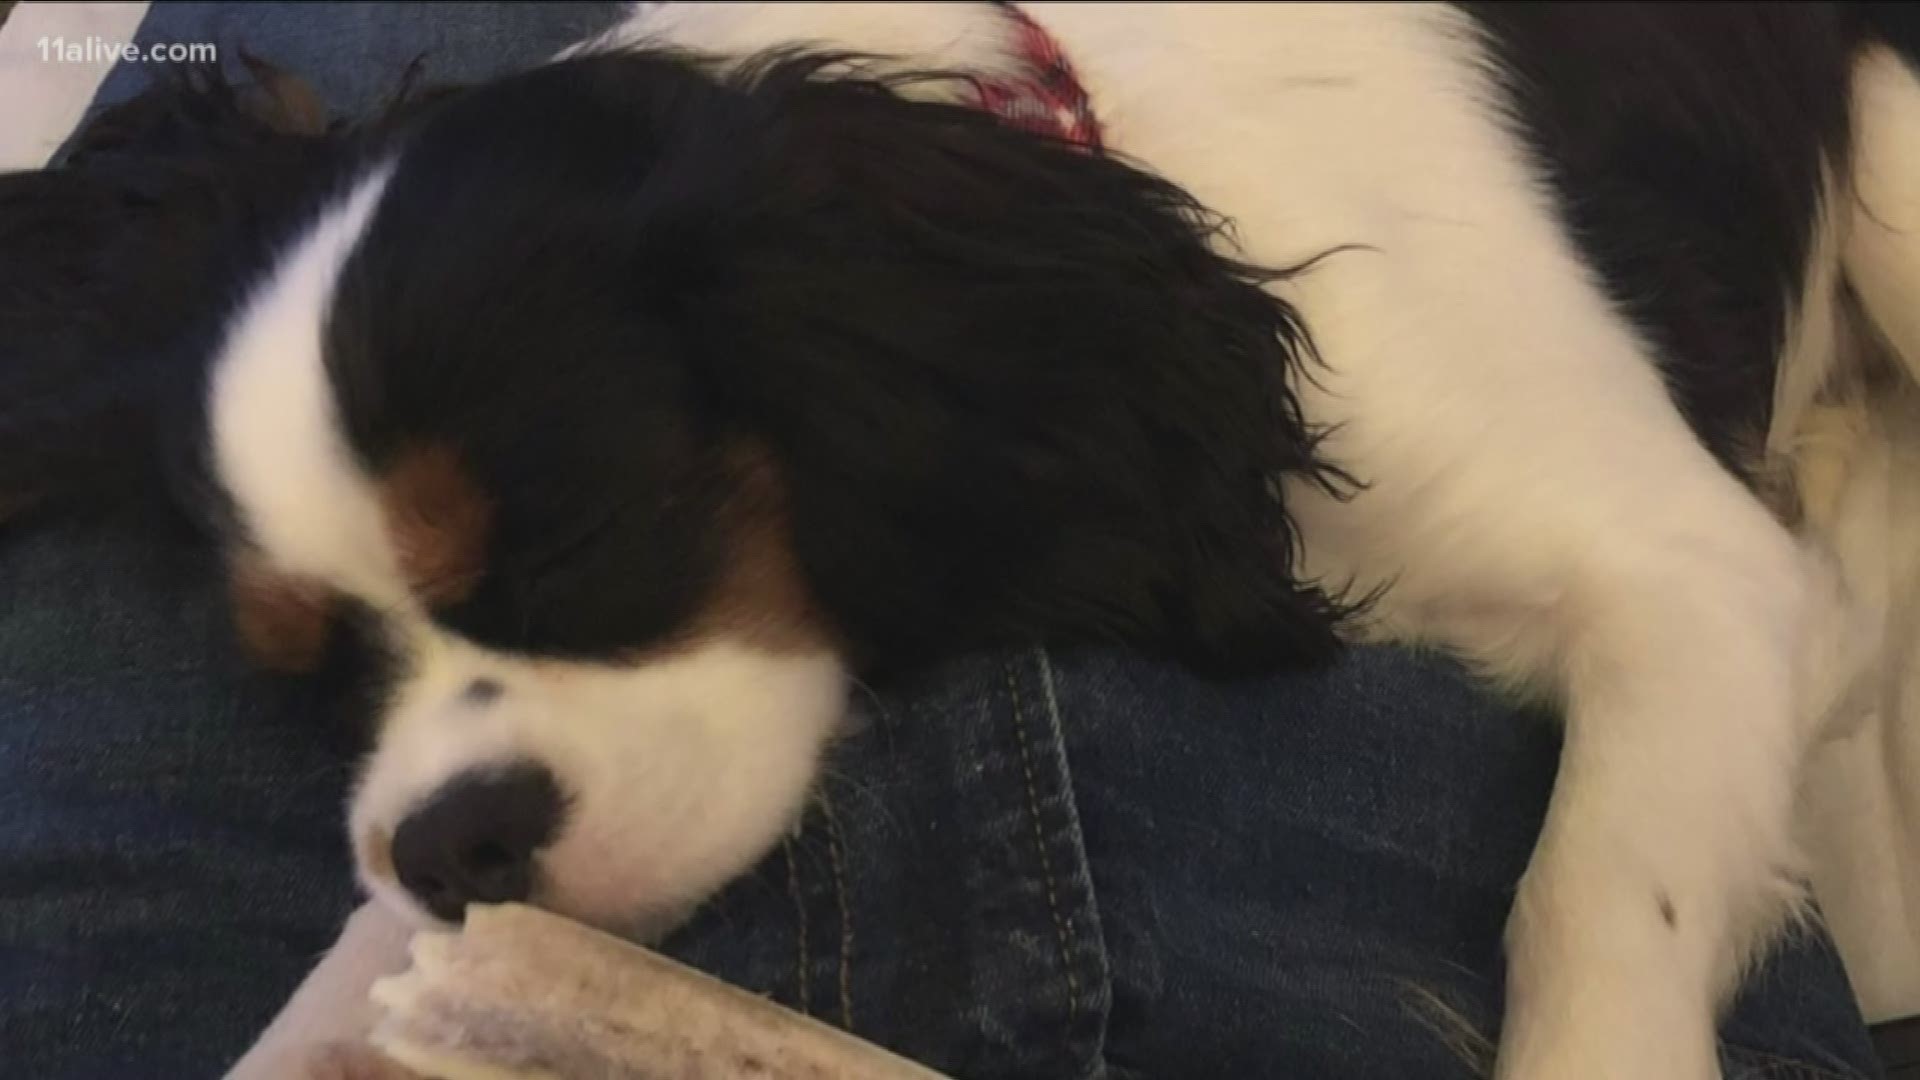 They were on a trail where they regularly visit. But, this time, little Izzy was attacked. The 8-month-old King Charles Spaniel died a short time later.